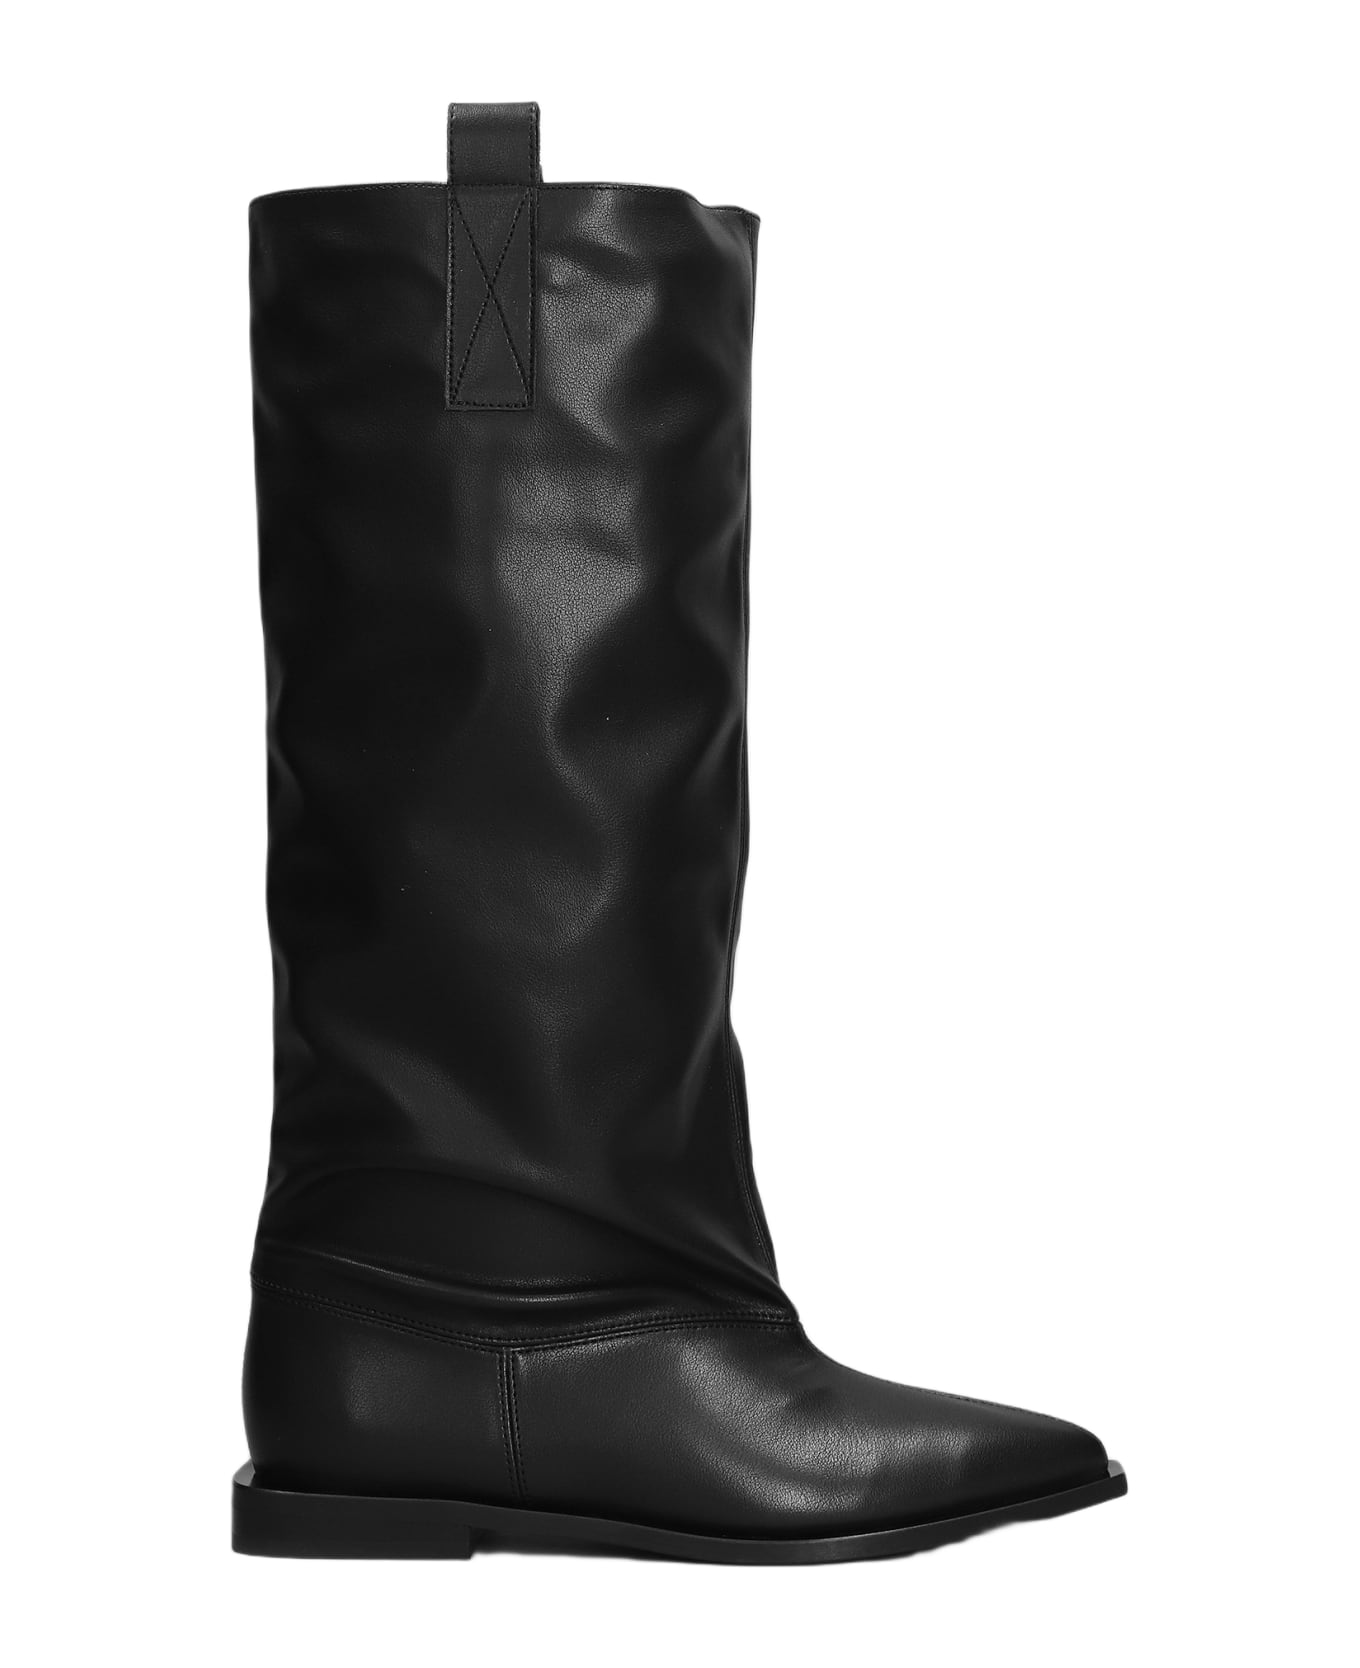 Ganni Low Heels Boots In Black Leather - black